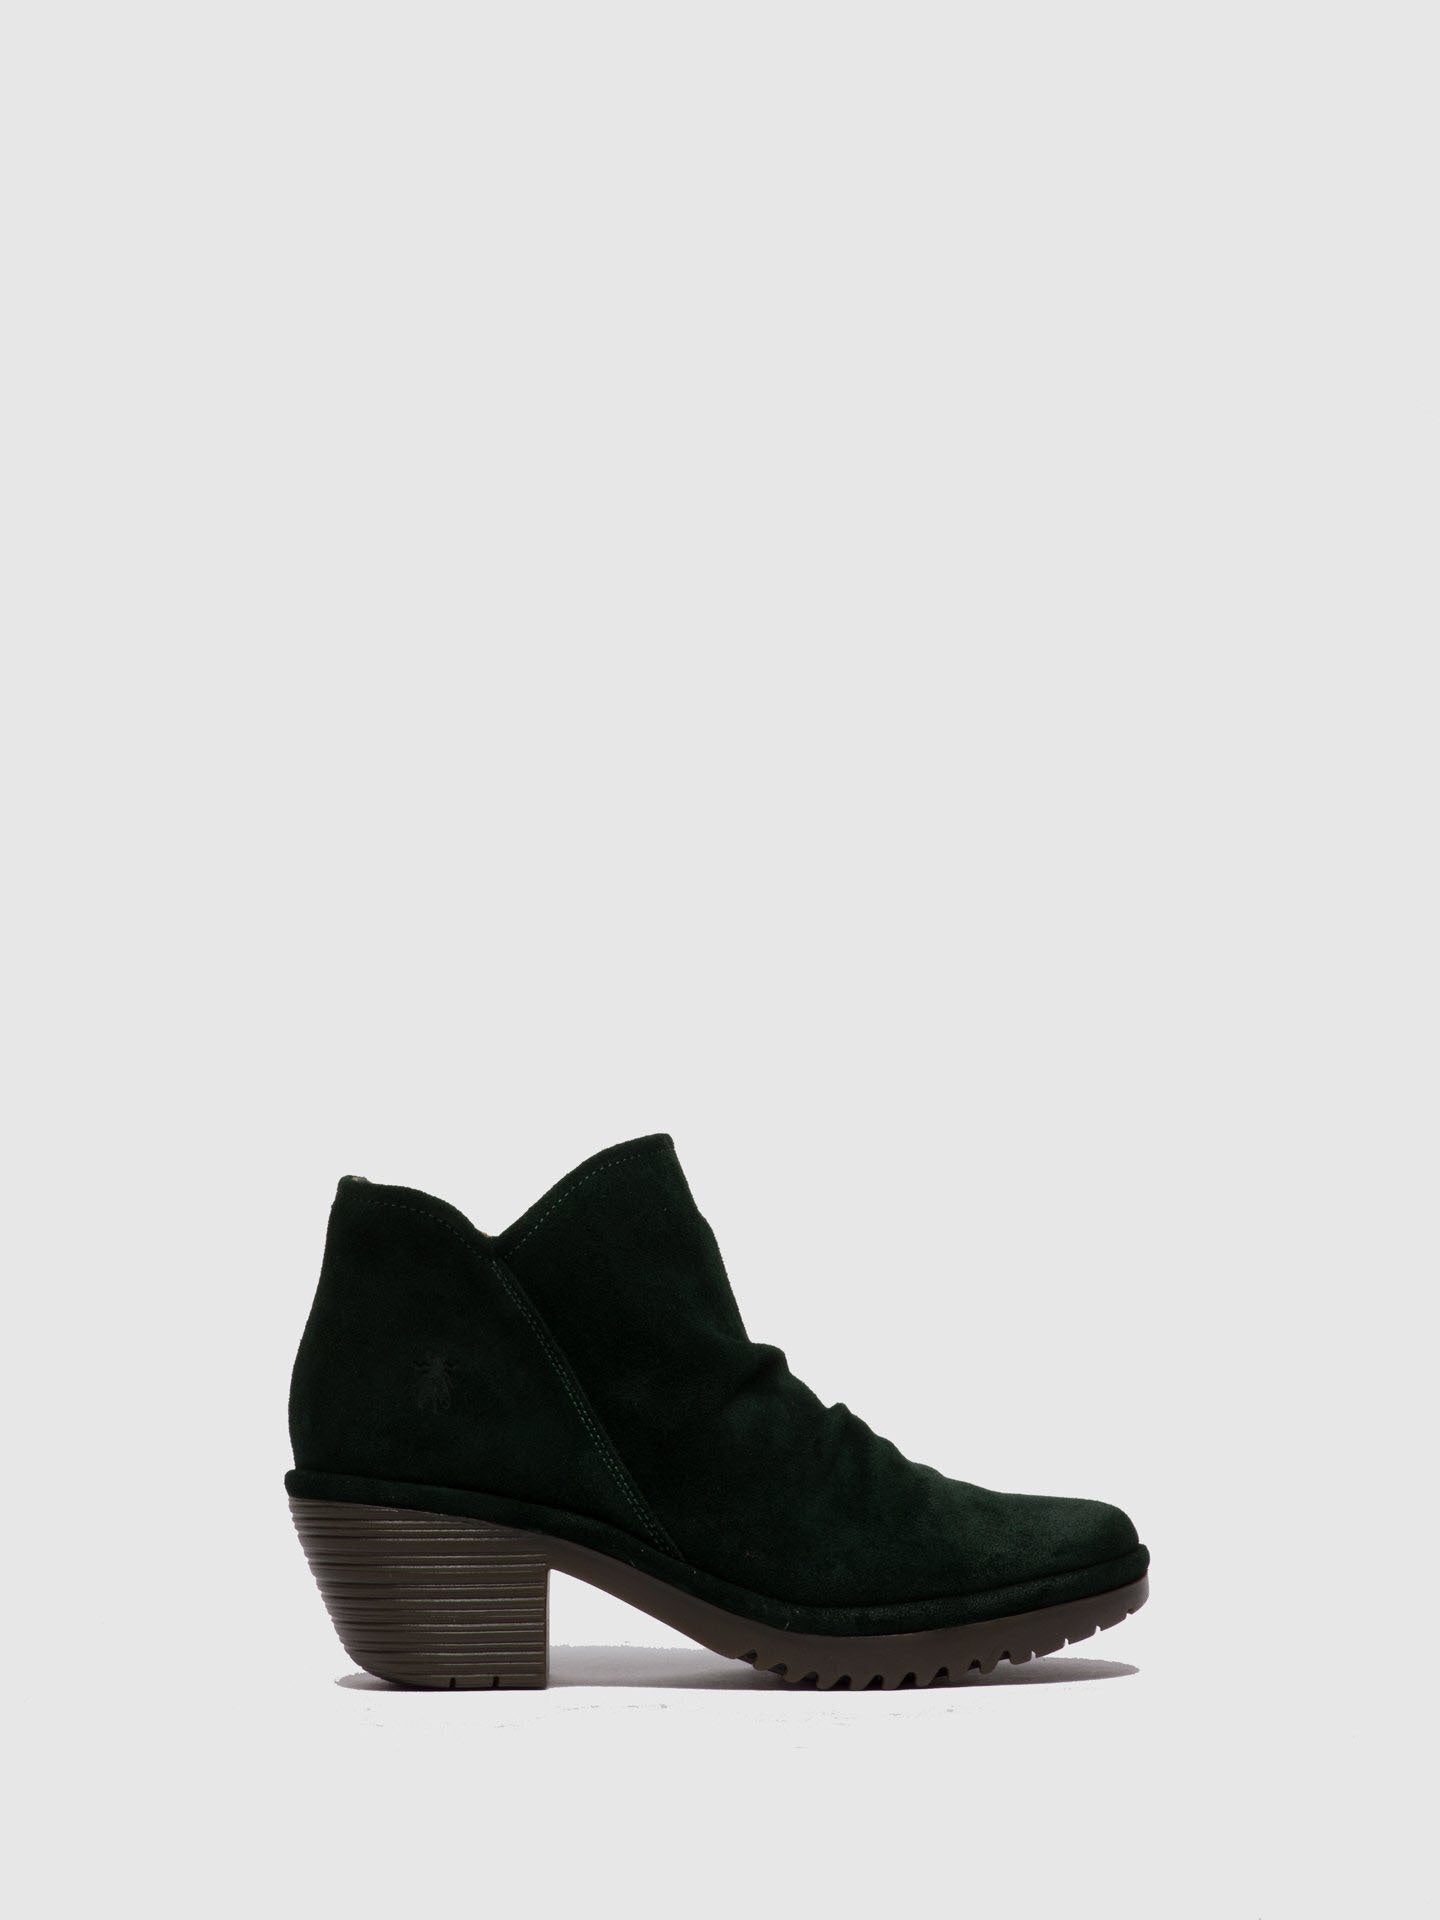 Fly London Botins com Fecho WEZO890FLY OILSUEDE GREEN FOREST